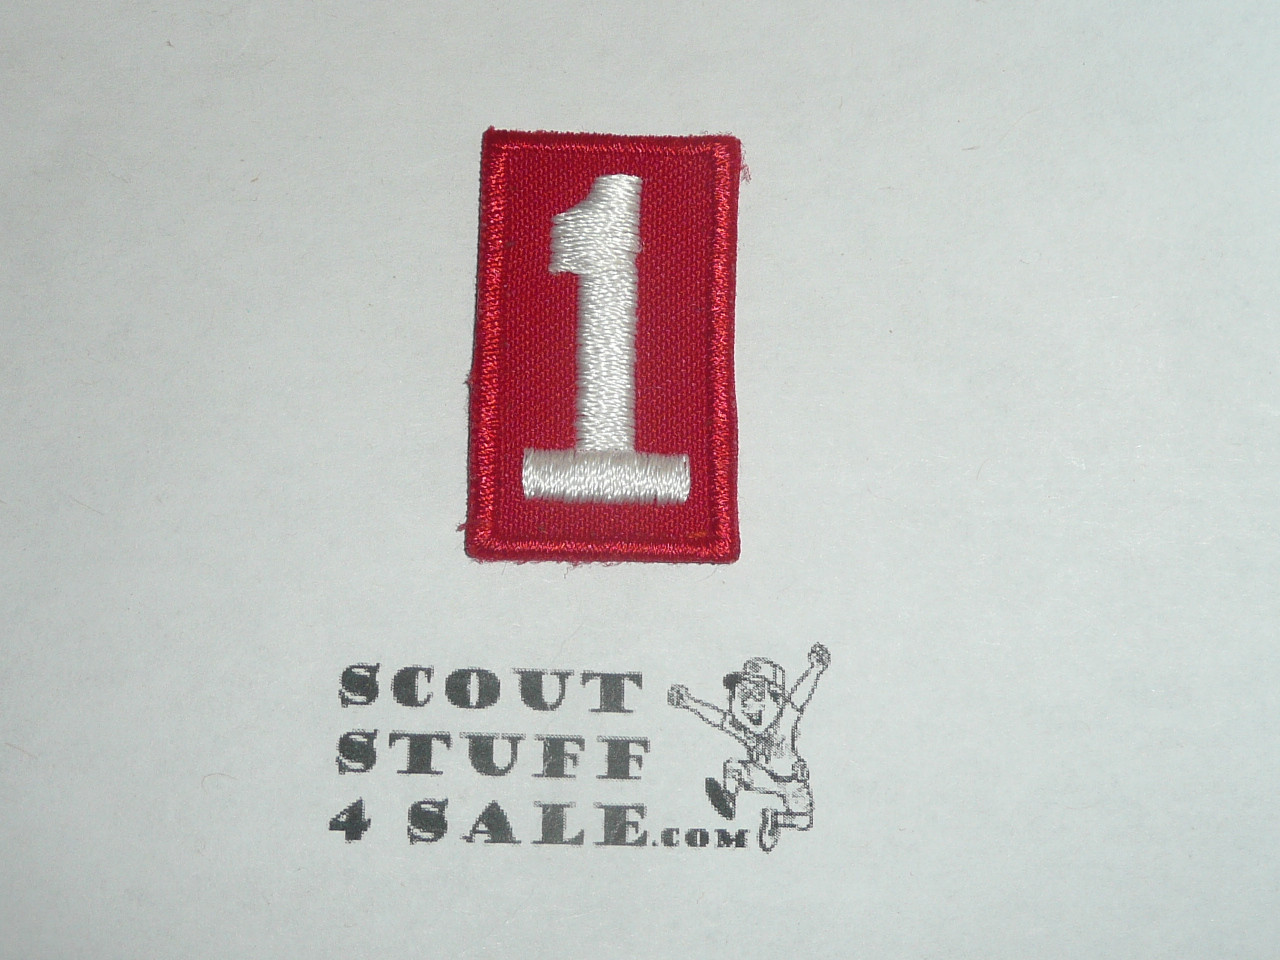 Old Red Troop Numeral "1", twill